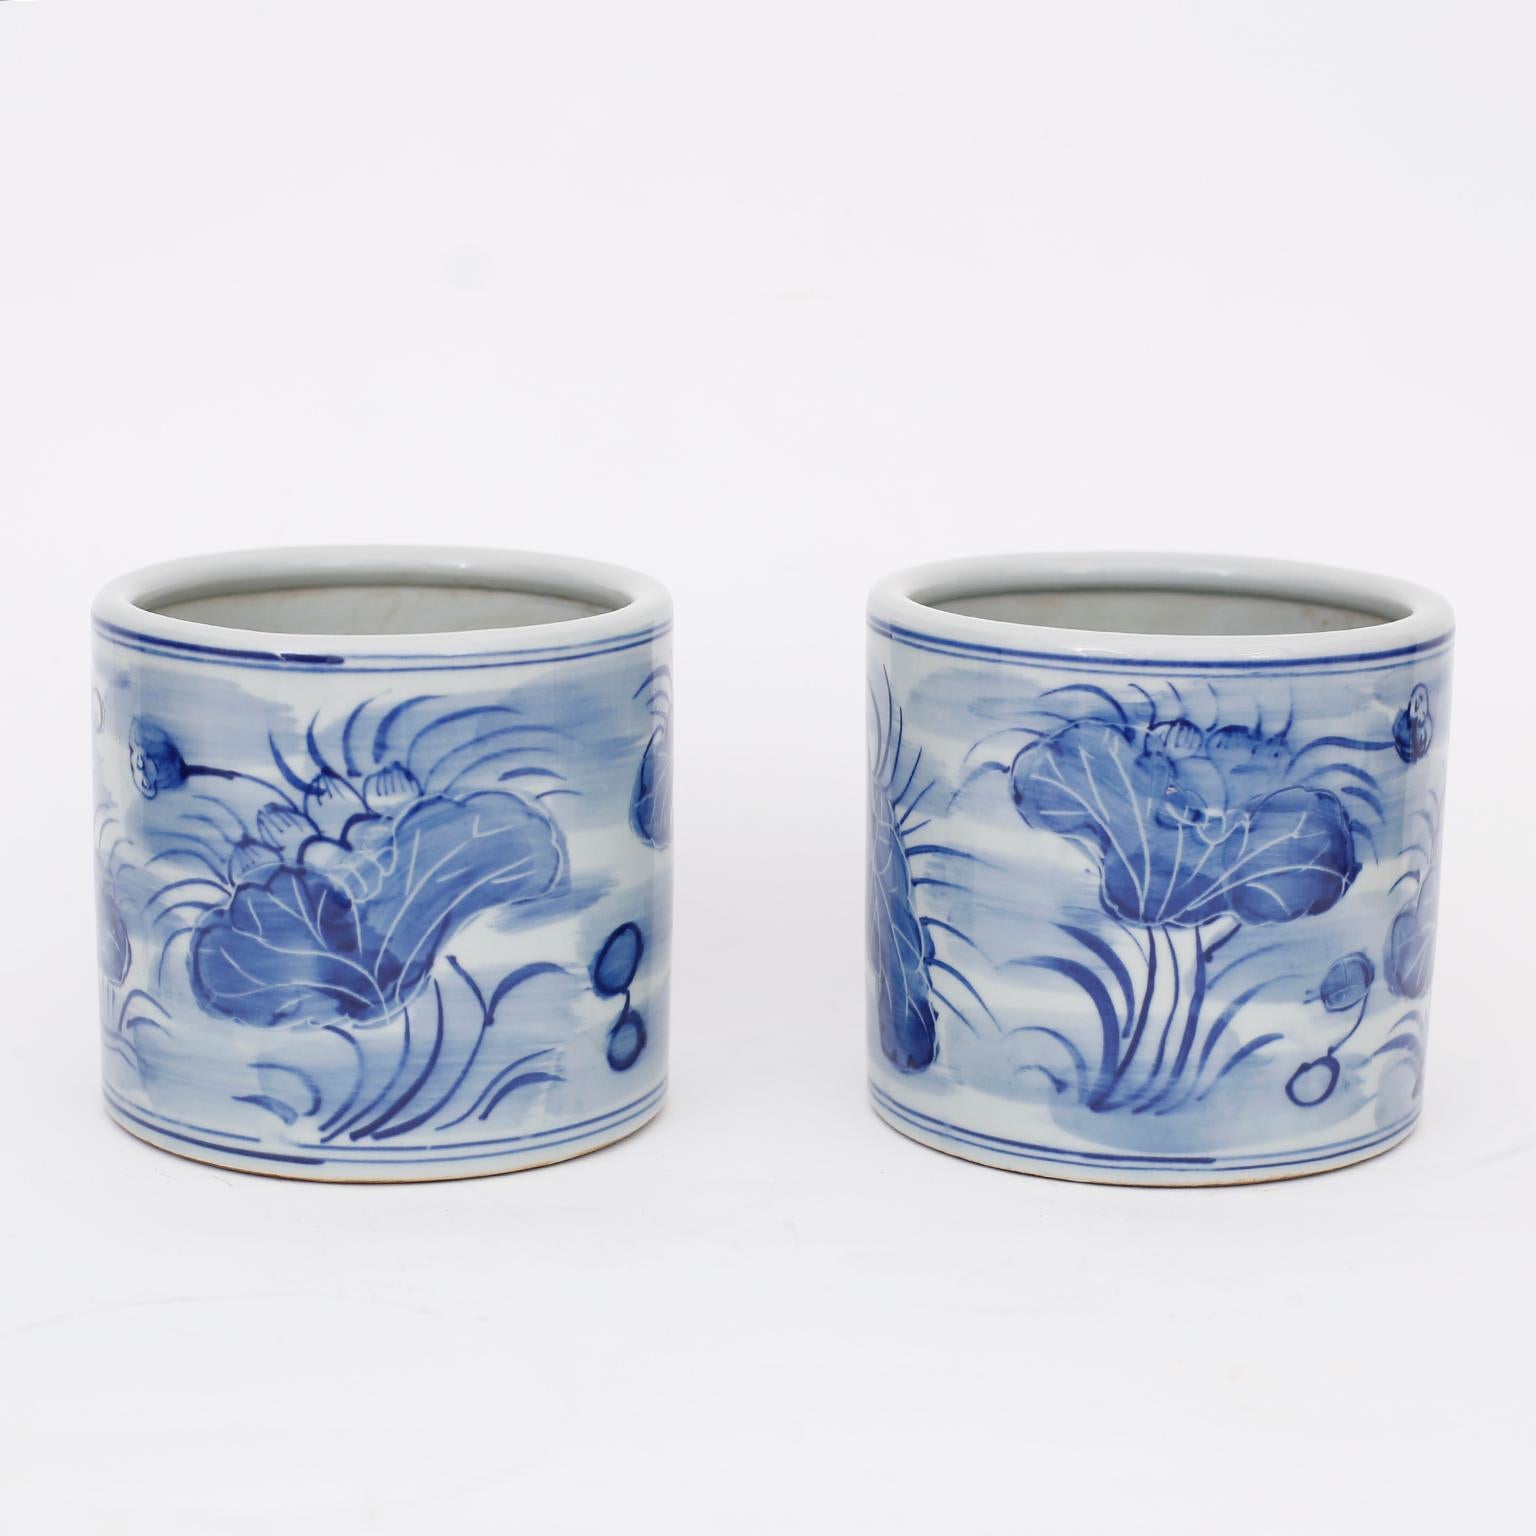 Chinese Export Pair of Blue and White Porcelain Pots